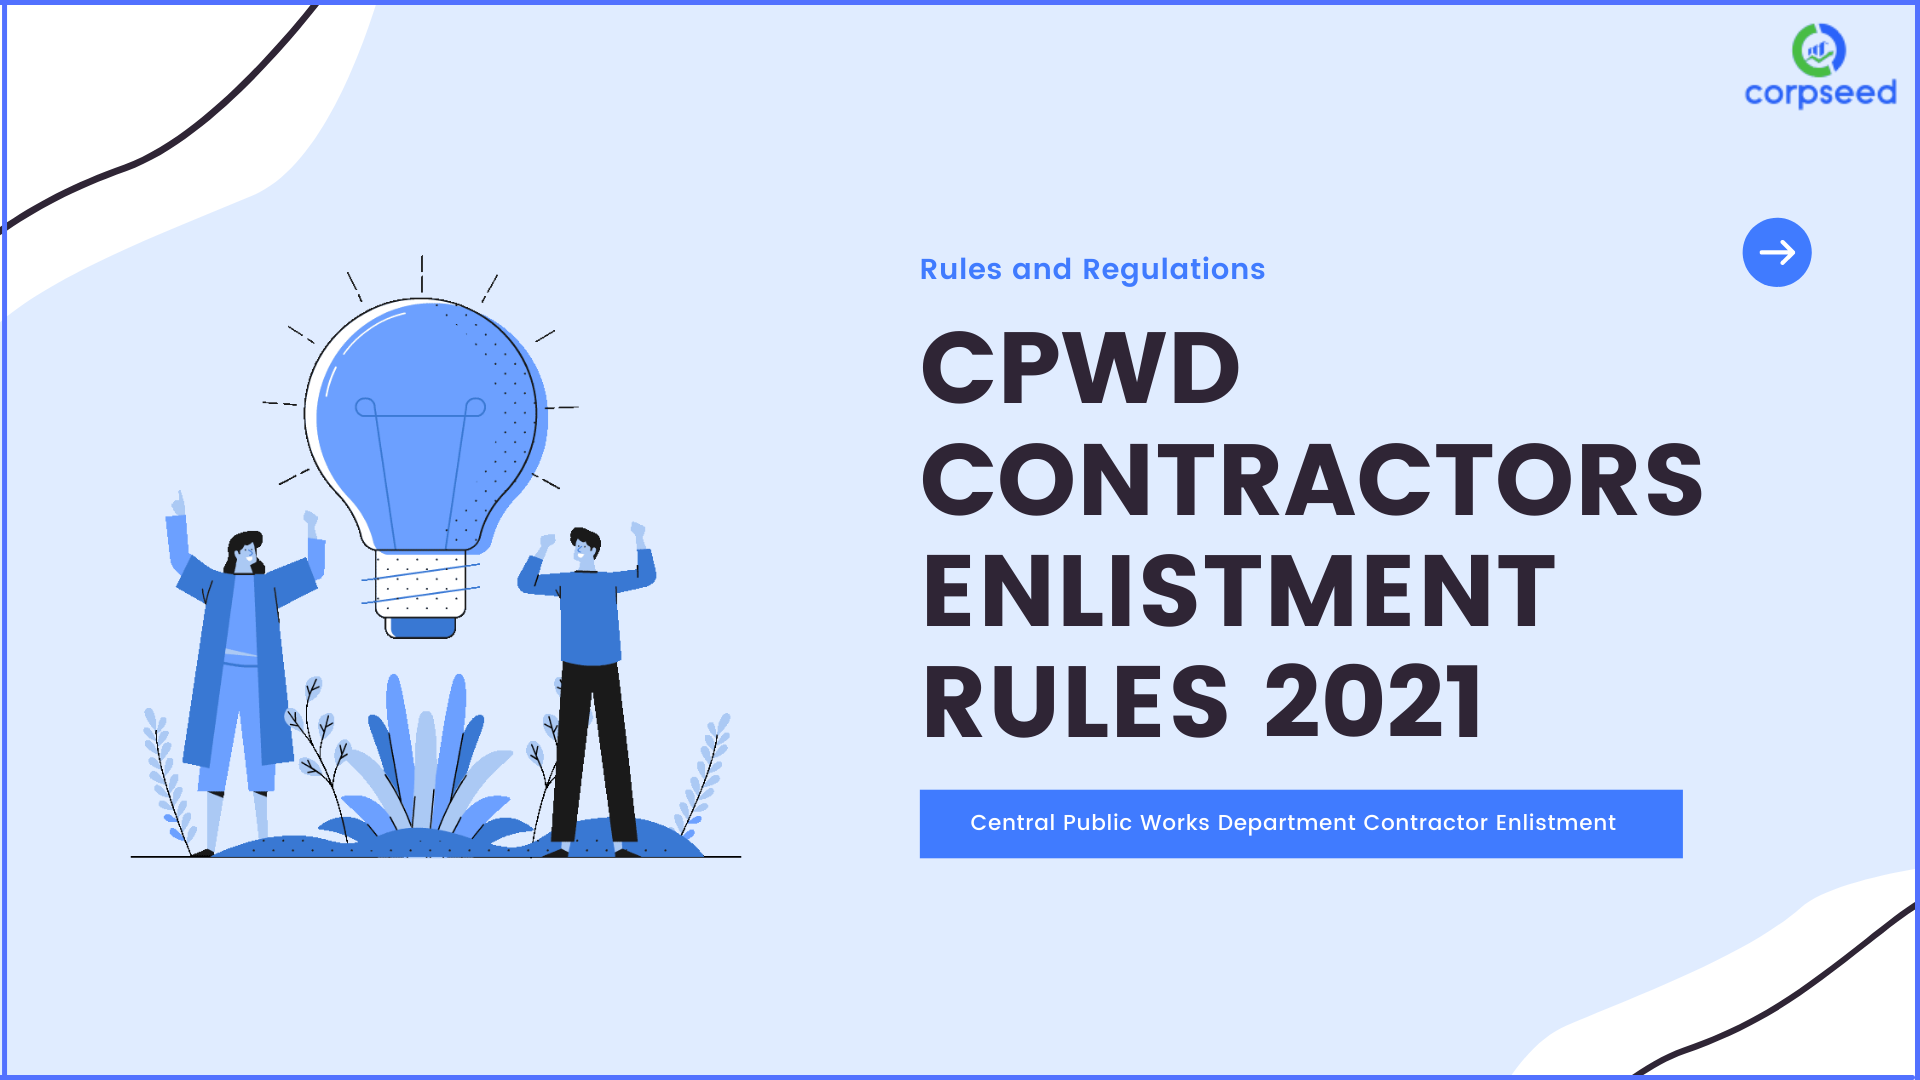 cpwd-contractor-enlistment-rules-2021-corpseed.png